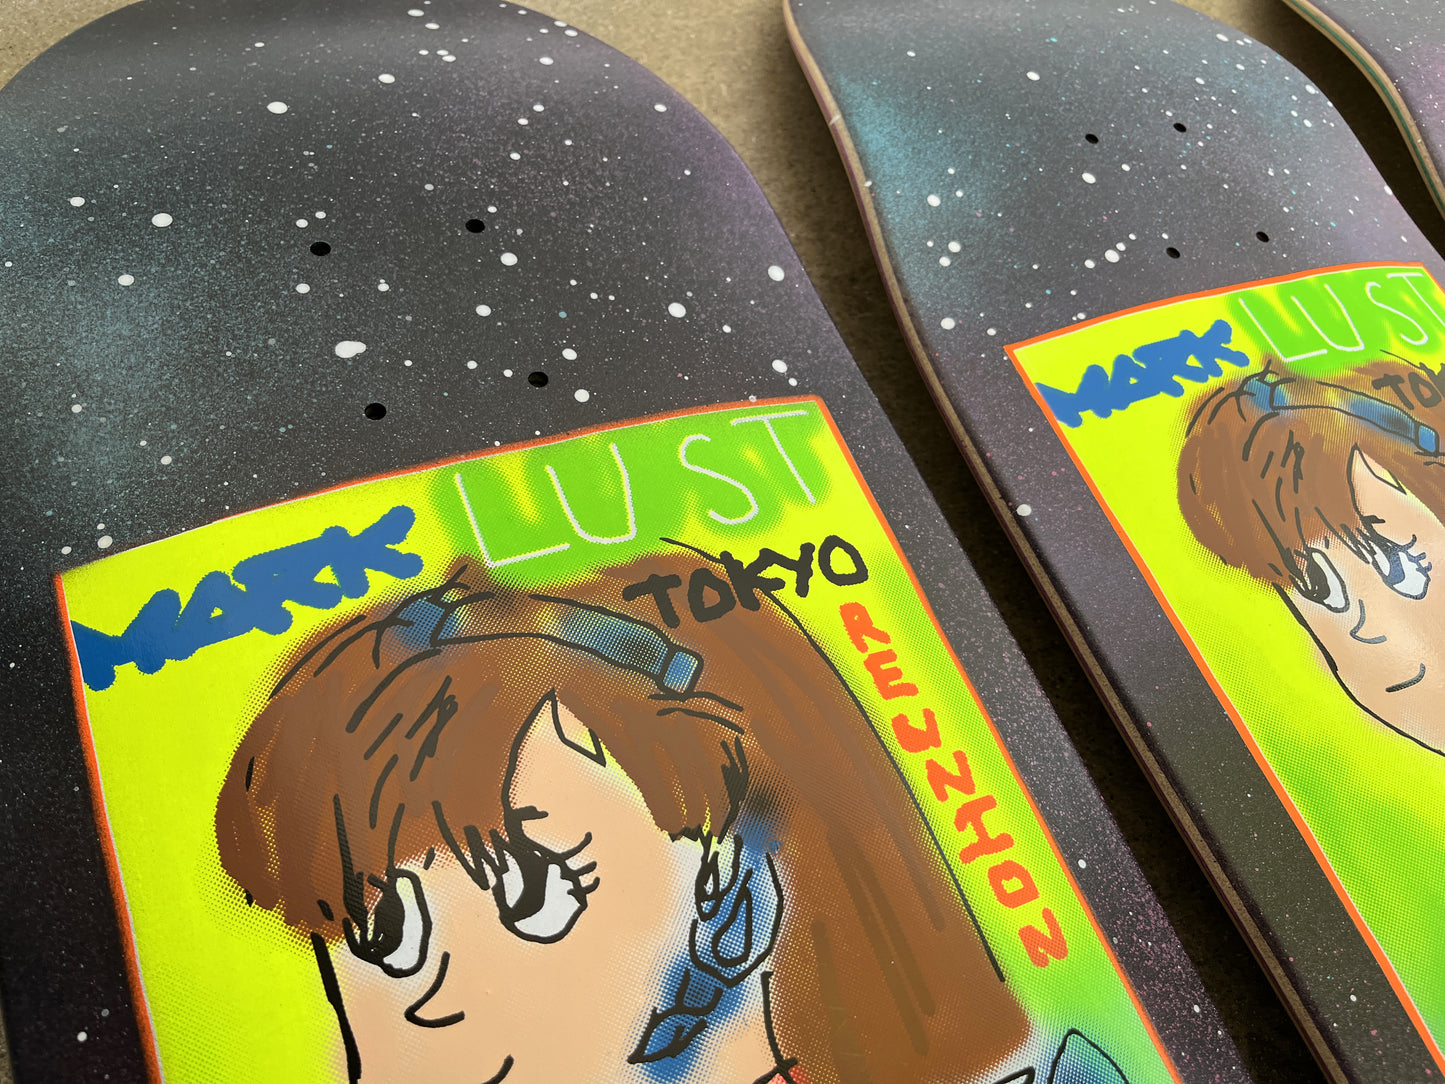 gonz dream girl GALAXY SIGNED original size 9.5 X 31.75 HAND PAINTED BACKGROUND